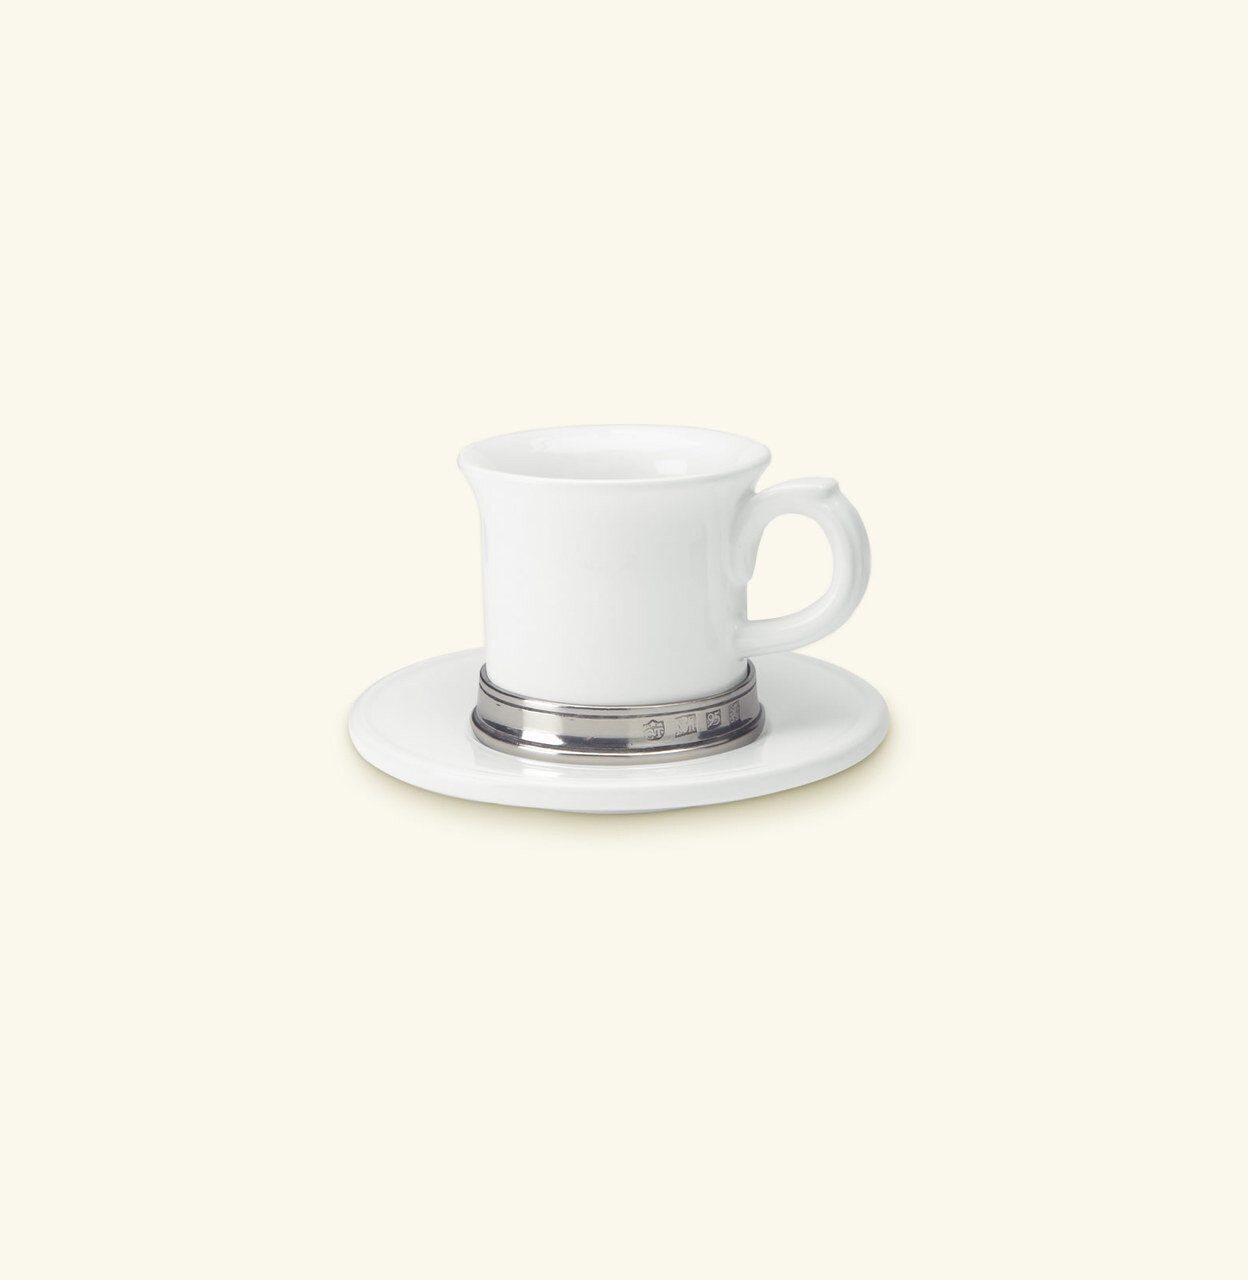 Match Pewter Convivio Espresso Cup With Saucer White